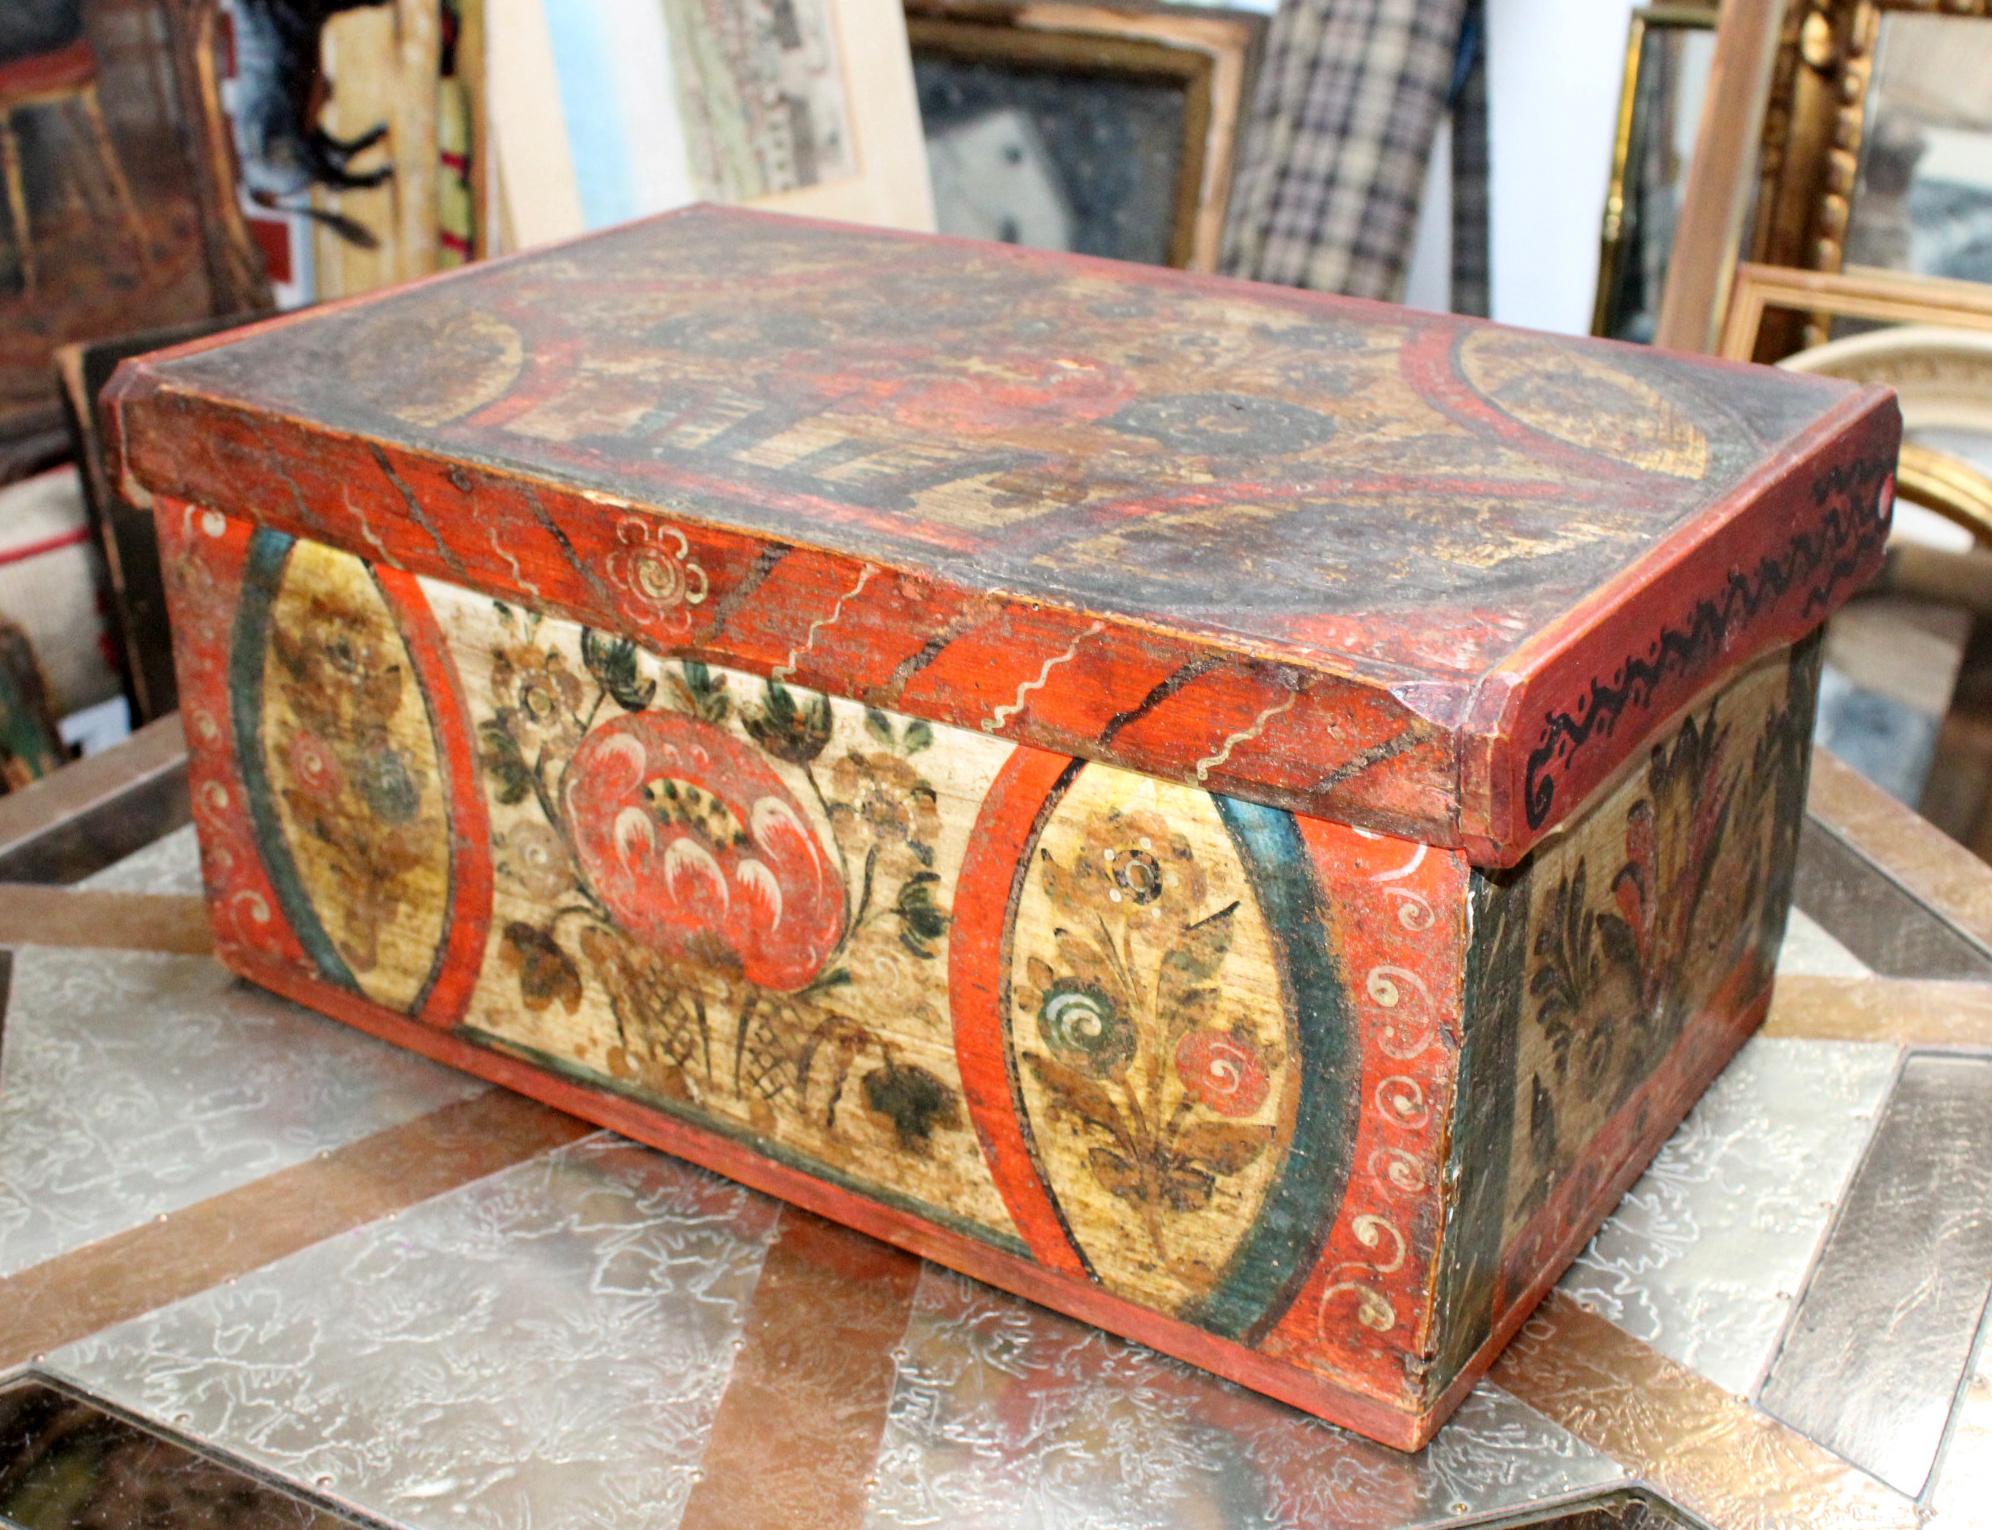 Late 18th century northern Switzerland wooden box with hand painted vegetable motifs.

 